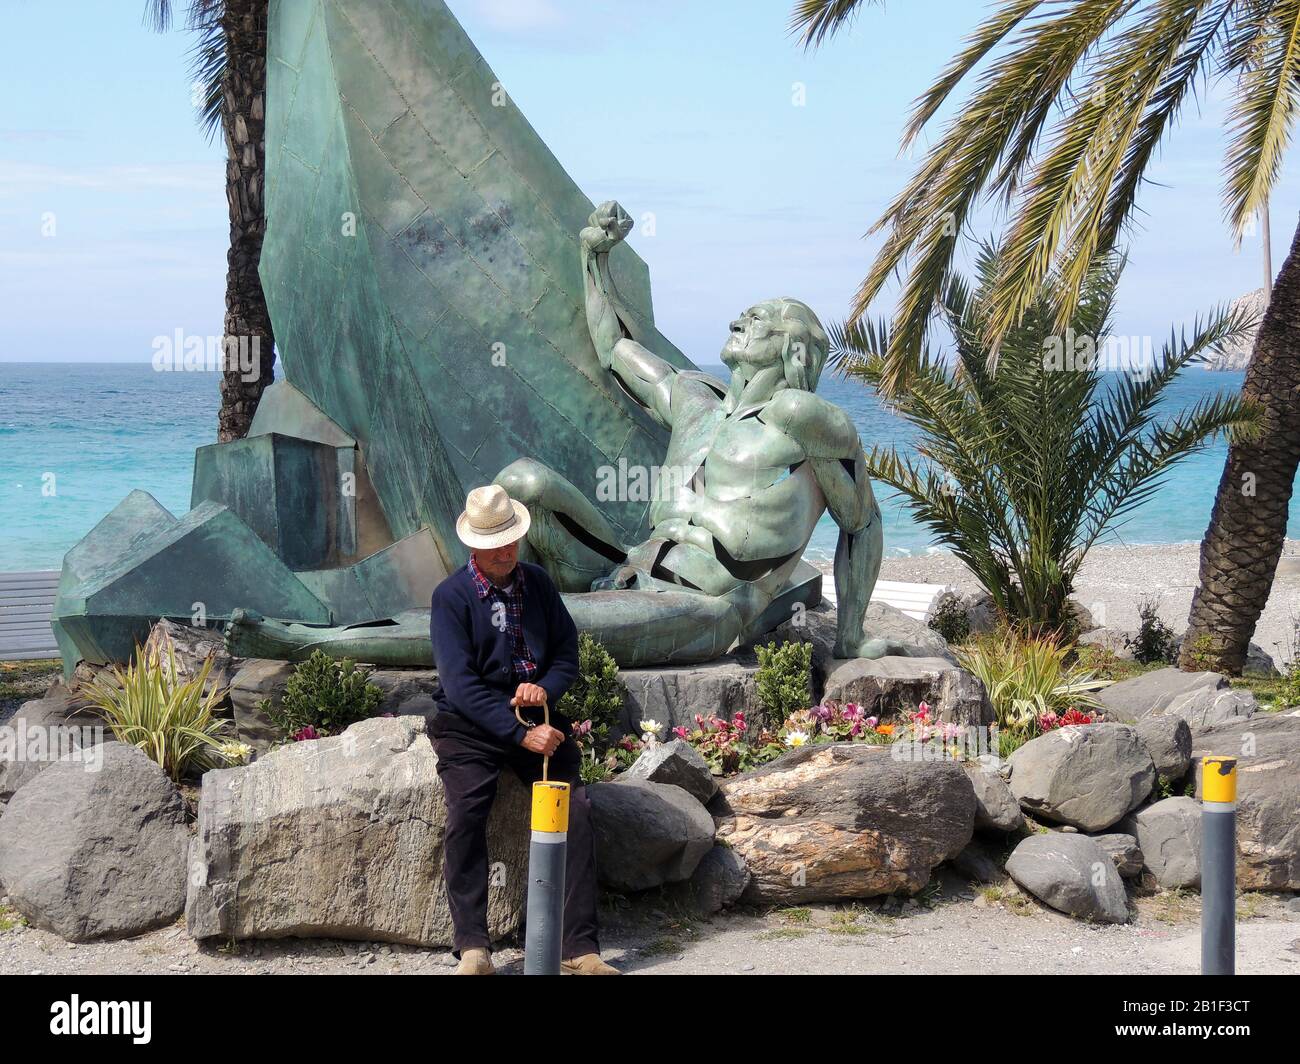 DAYDREAMING OF FORMER DAYS  La Heradurra, Almuñécar, Granada Province, Spain 2017 -  An old man reflects on former times near the statue which commemorates the  sinking offshore of 25 of the 28 galleys from the Spanish Armada . Around  5000 people lost their lives in a single day. The statue also serves as a monument to all those who go have lost their lives at  sea.. Stock Photo